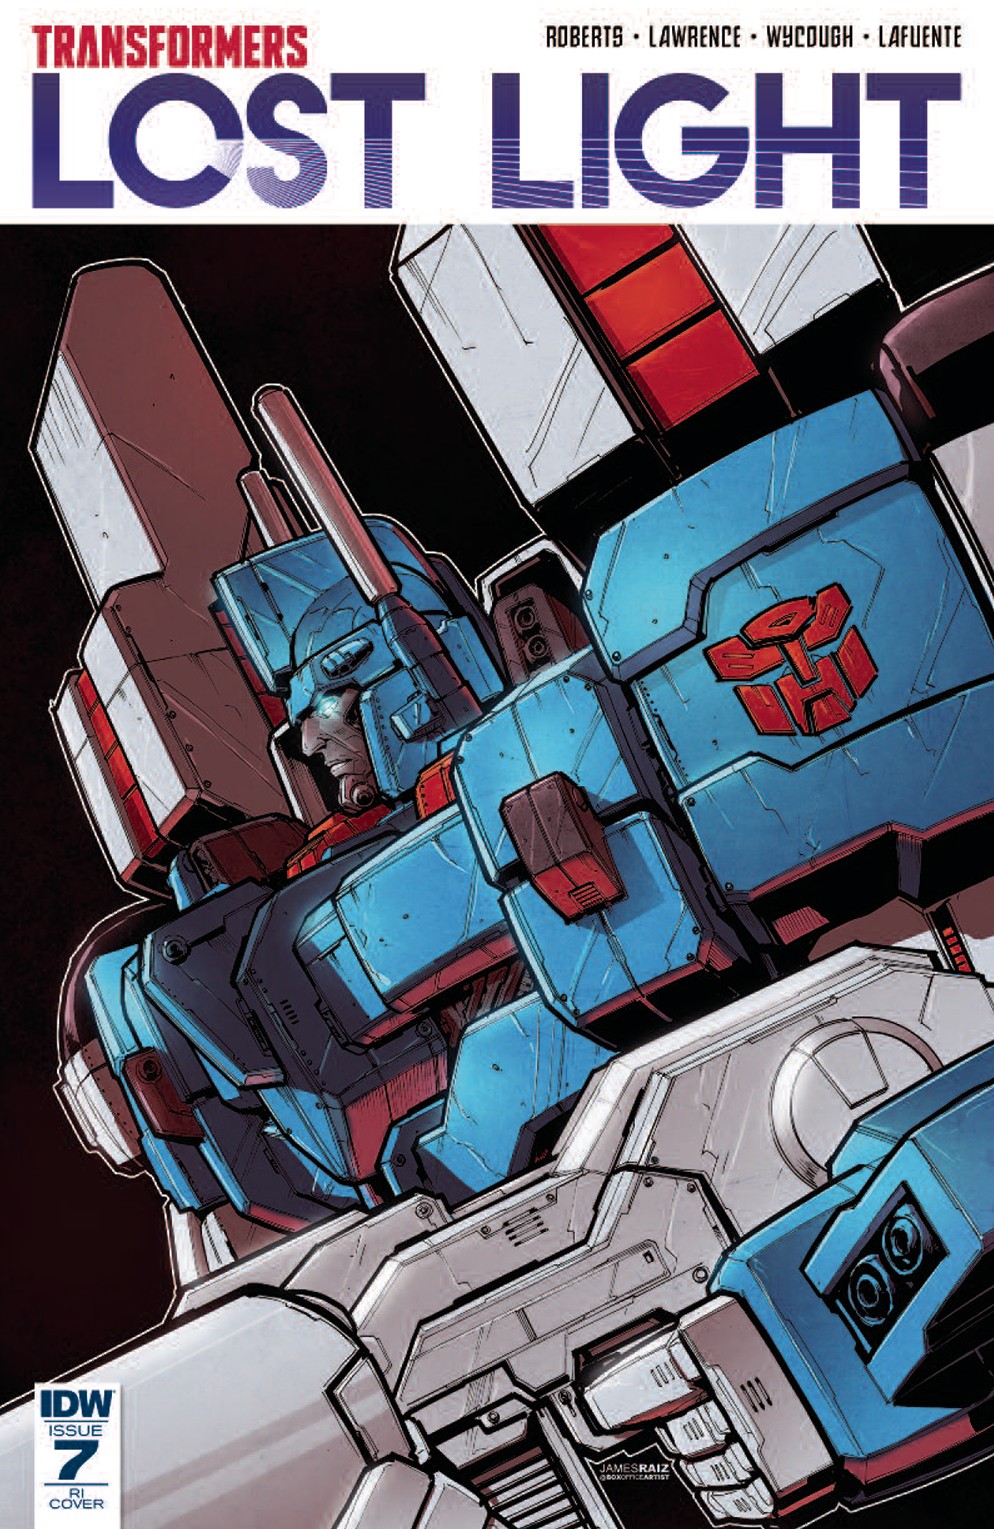 Transformers News: Variant Covers for IDW Transformers: Lost Light #7 by Alex Milne, James Raiz, Jack Lawrence